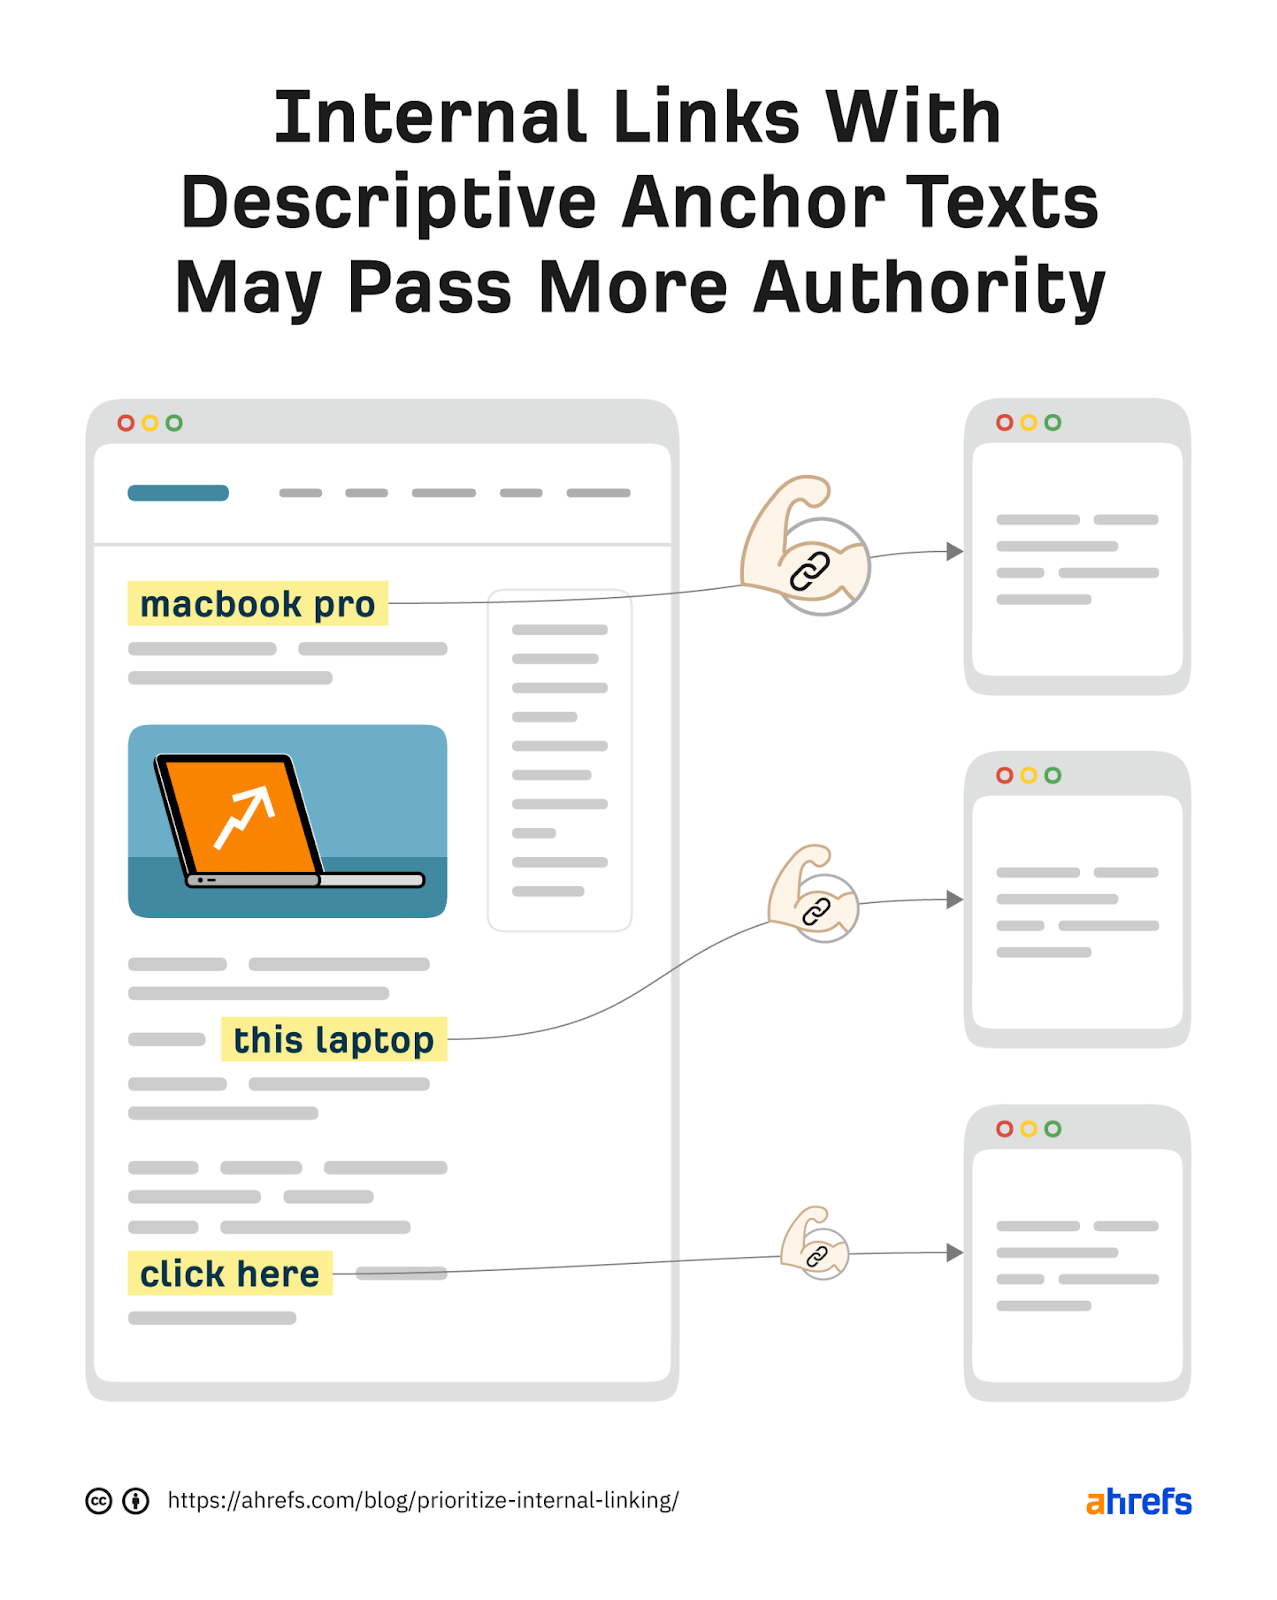 Infographic of article with 3 anchor texts. The biggest muscular arm connects the most descriptive anchor text to another article (implying the most authority passed)